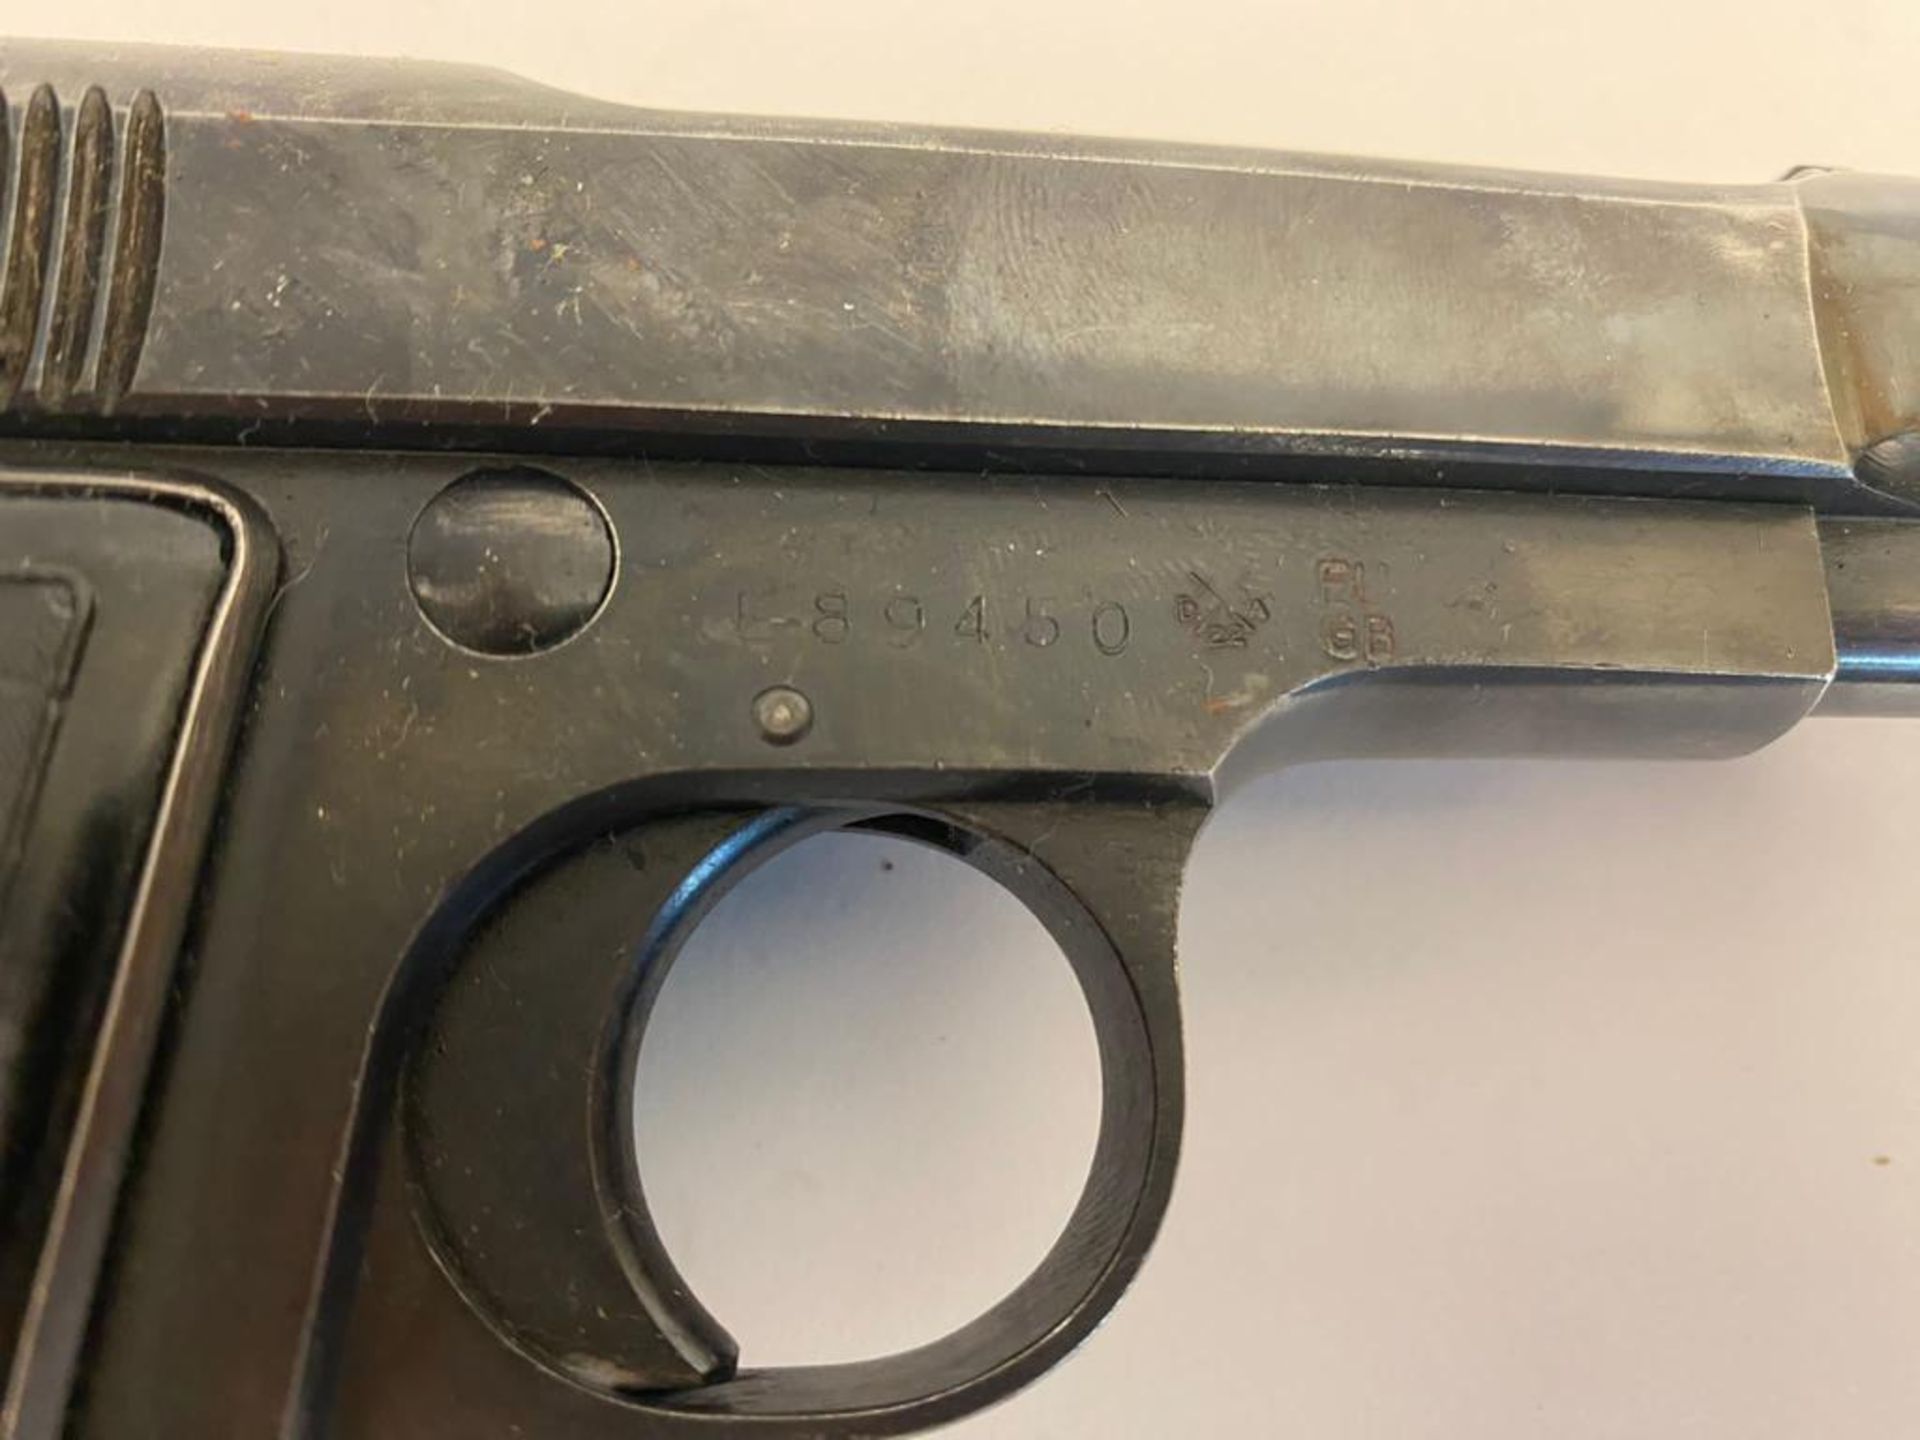 A Deactivated Supressed Beretta Model 94. This 9mm semi-automatic pistol has a removable silencer - Bild 4 aus 11